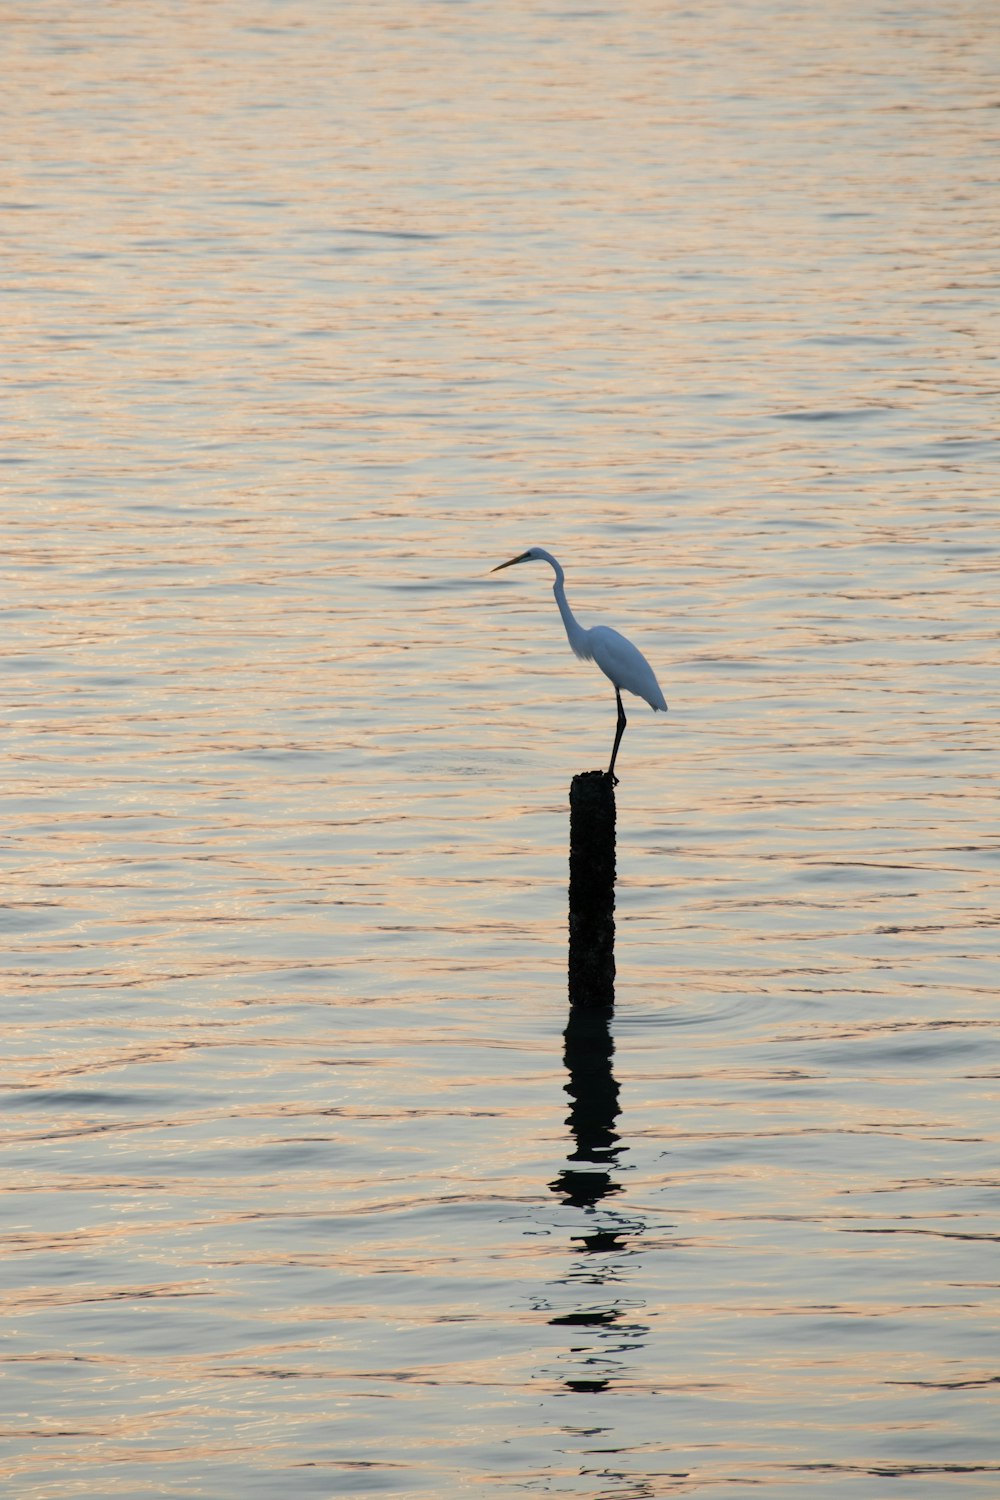 a white bird is standing on a post in the water